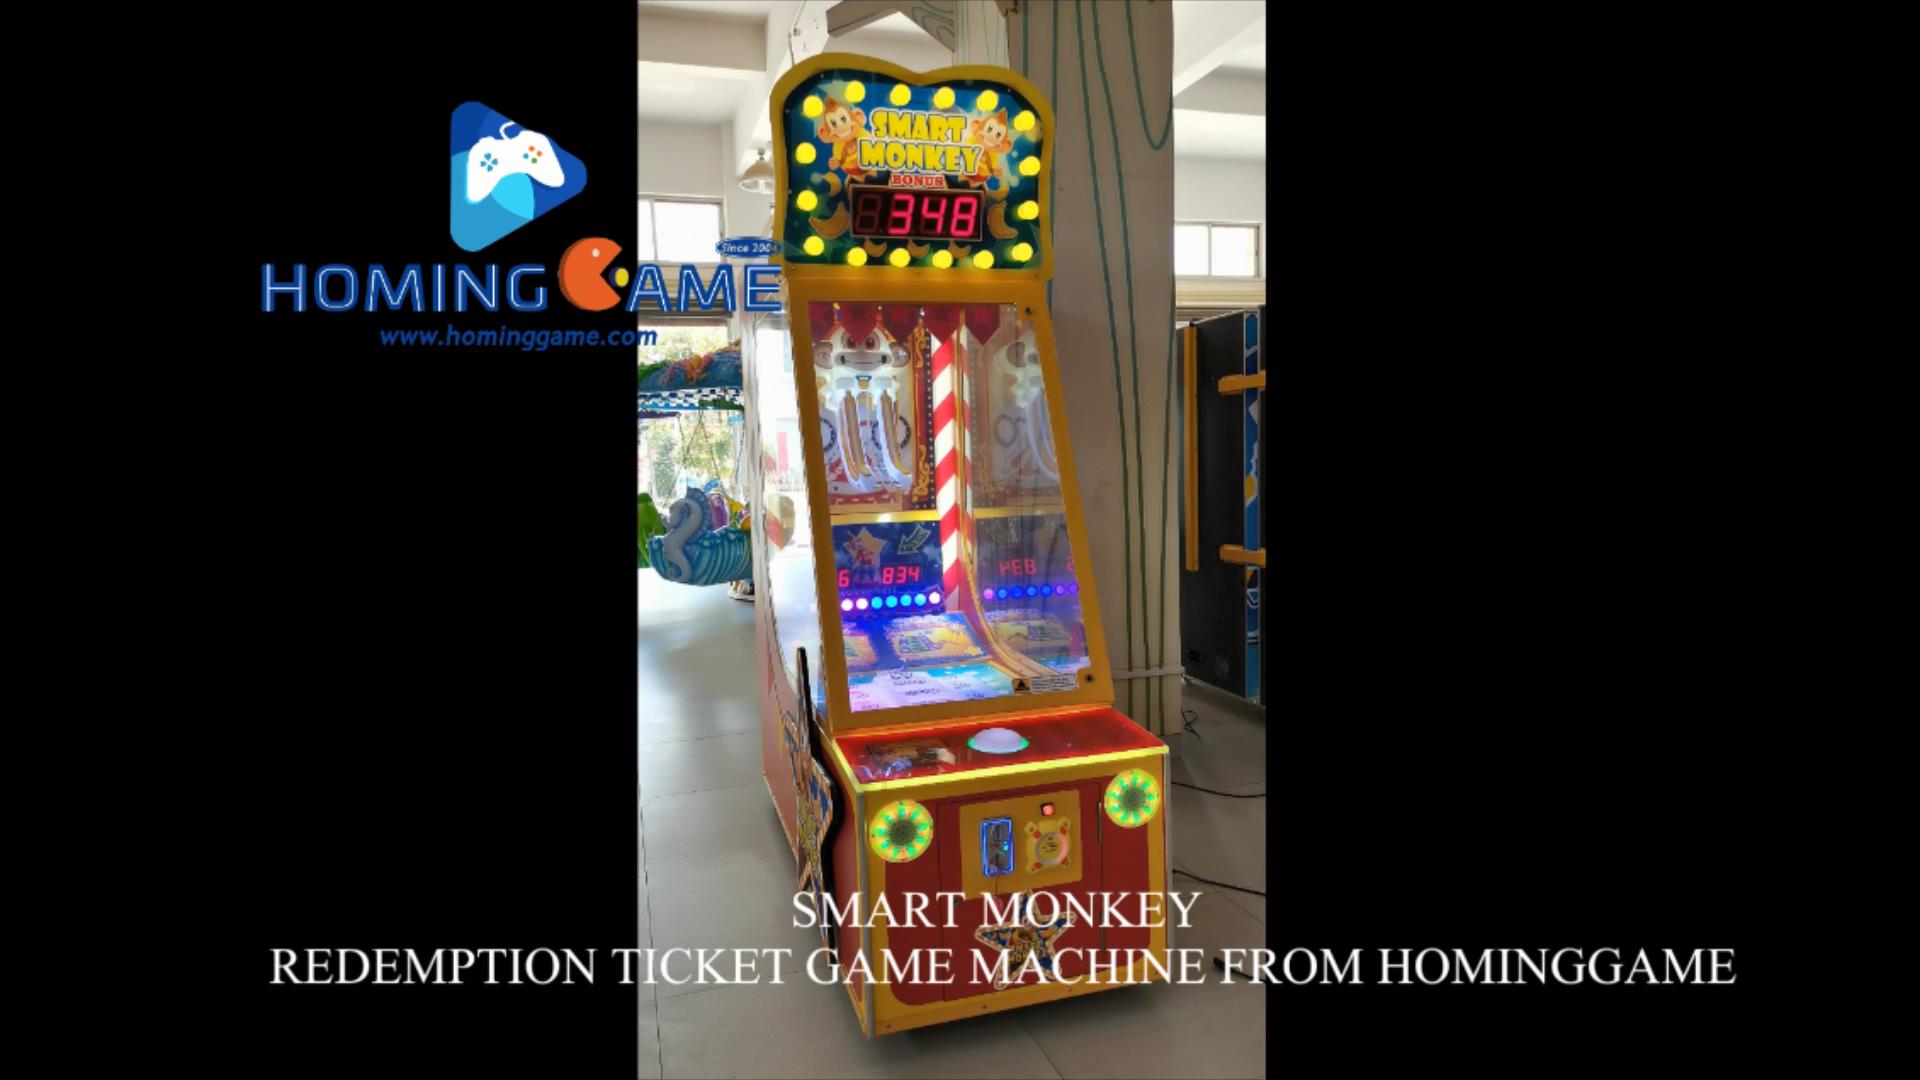 Funny Coin Operated Redemption ticket game machine Smart Monkey Kids Lottery Arcade Game Machine From HomingGame(Order call whatsapp:+8618688409495),smart monkey lottery game machine,smart monkey kids lottery game machine,smart monkey redemption game machine,redemption game machine,game machine,arcade game machine,coin operated game machine,indoor game machine,kids game machine,redemption ticket game machine,amsuement machine,amsuement park game equipment,game equipment,hominggame,www.gametube.hk,entertainment game machine,family entertainment game machine,kids game center game machine,arcade game machine for sale,amusement machine,amsuement park game,arcade games